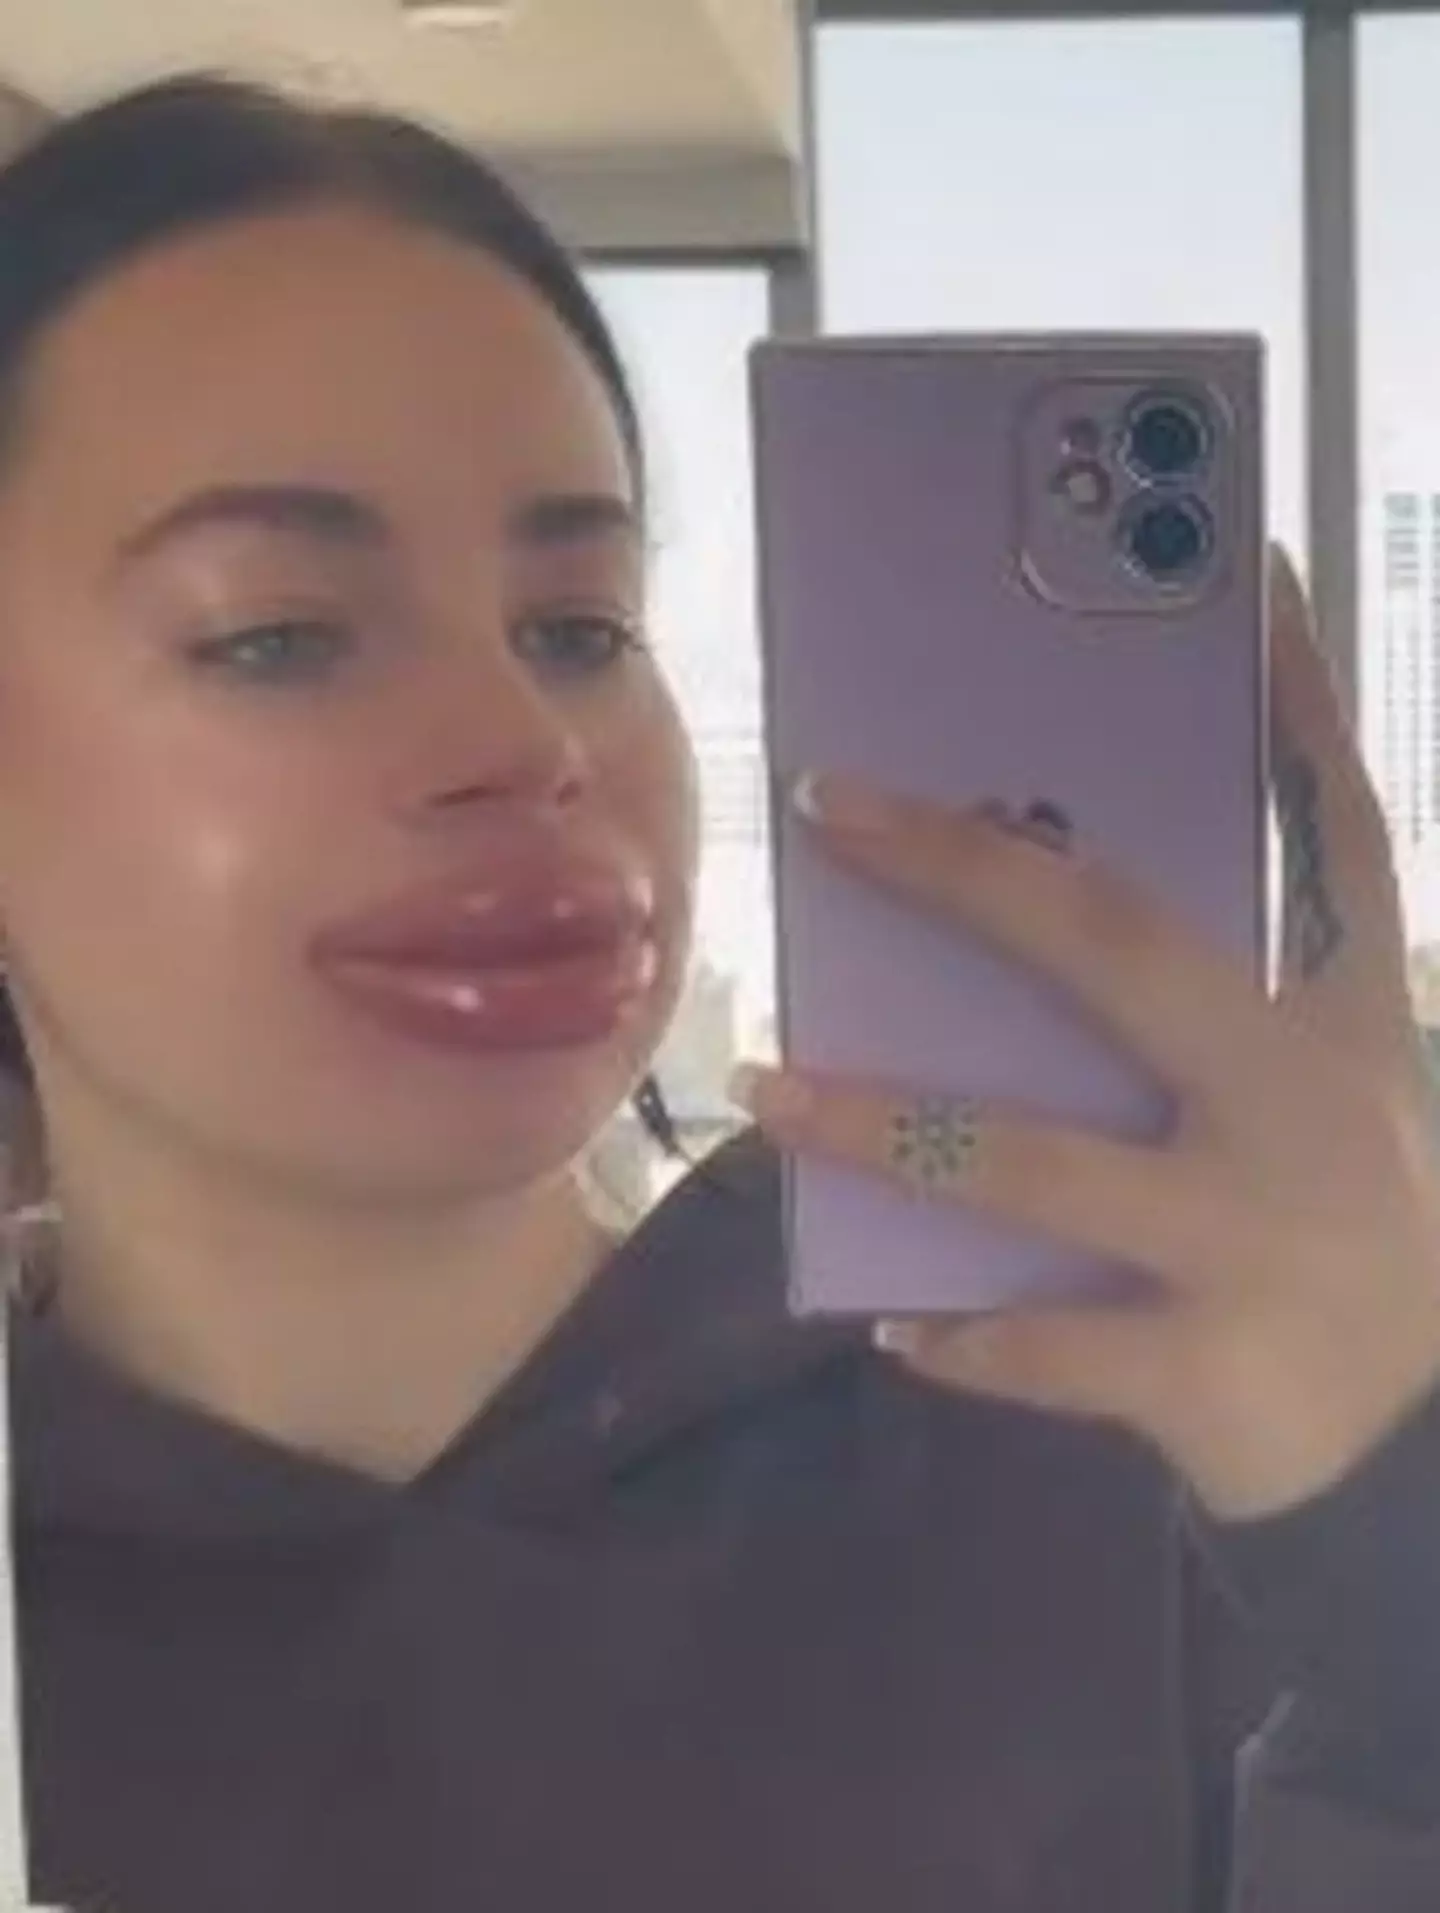 Jessica Burko was left with painfully swollen lips after having a free treatment as part of a giveaway.